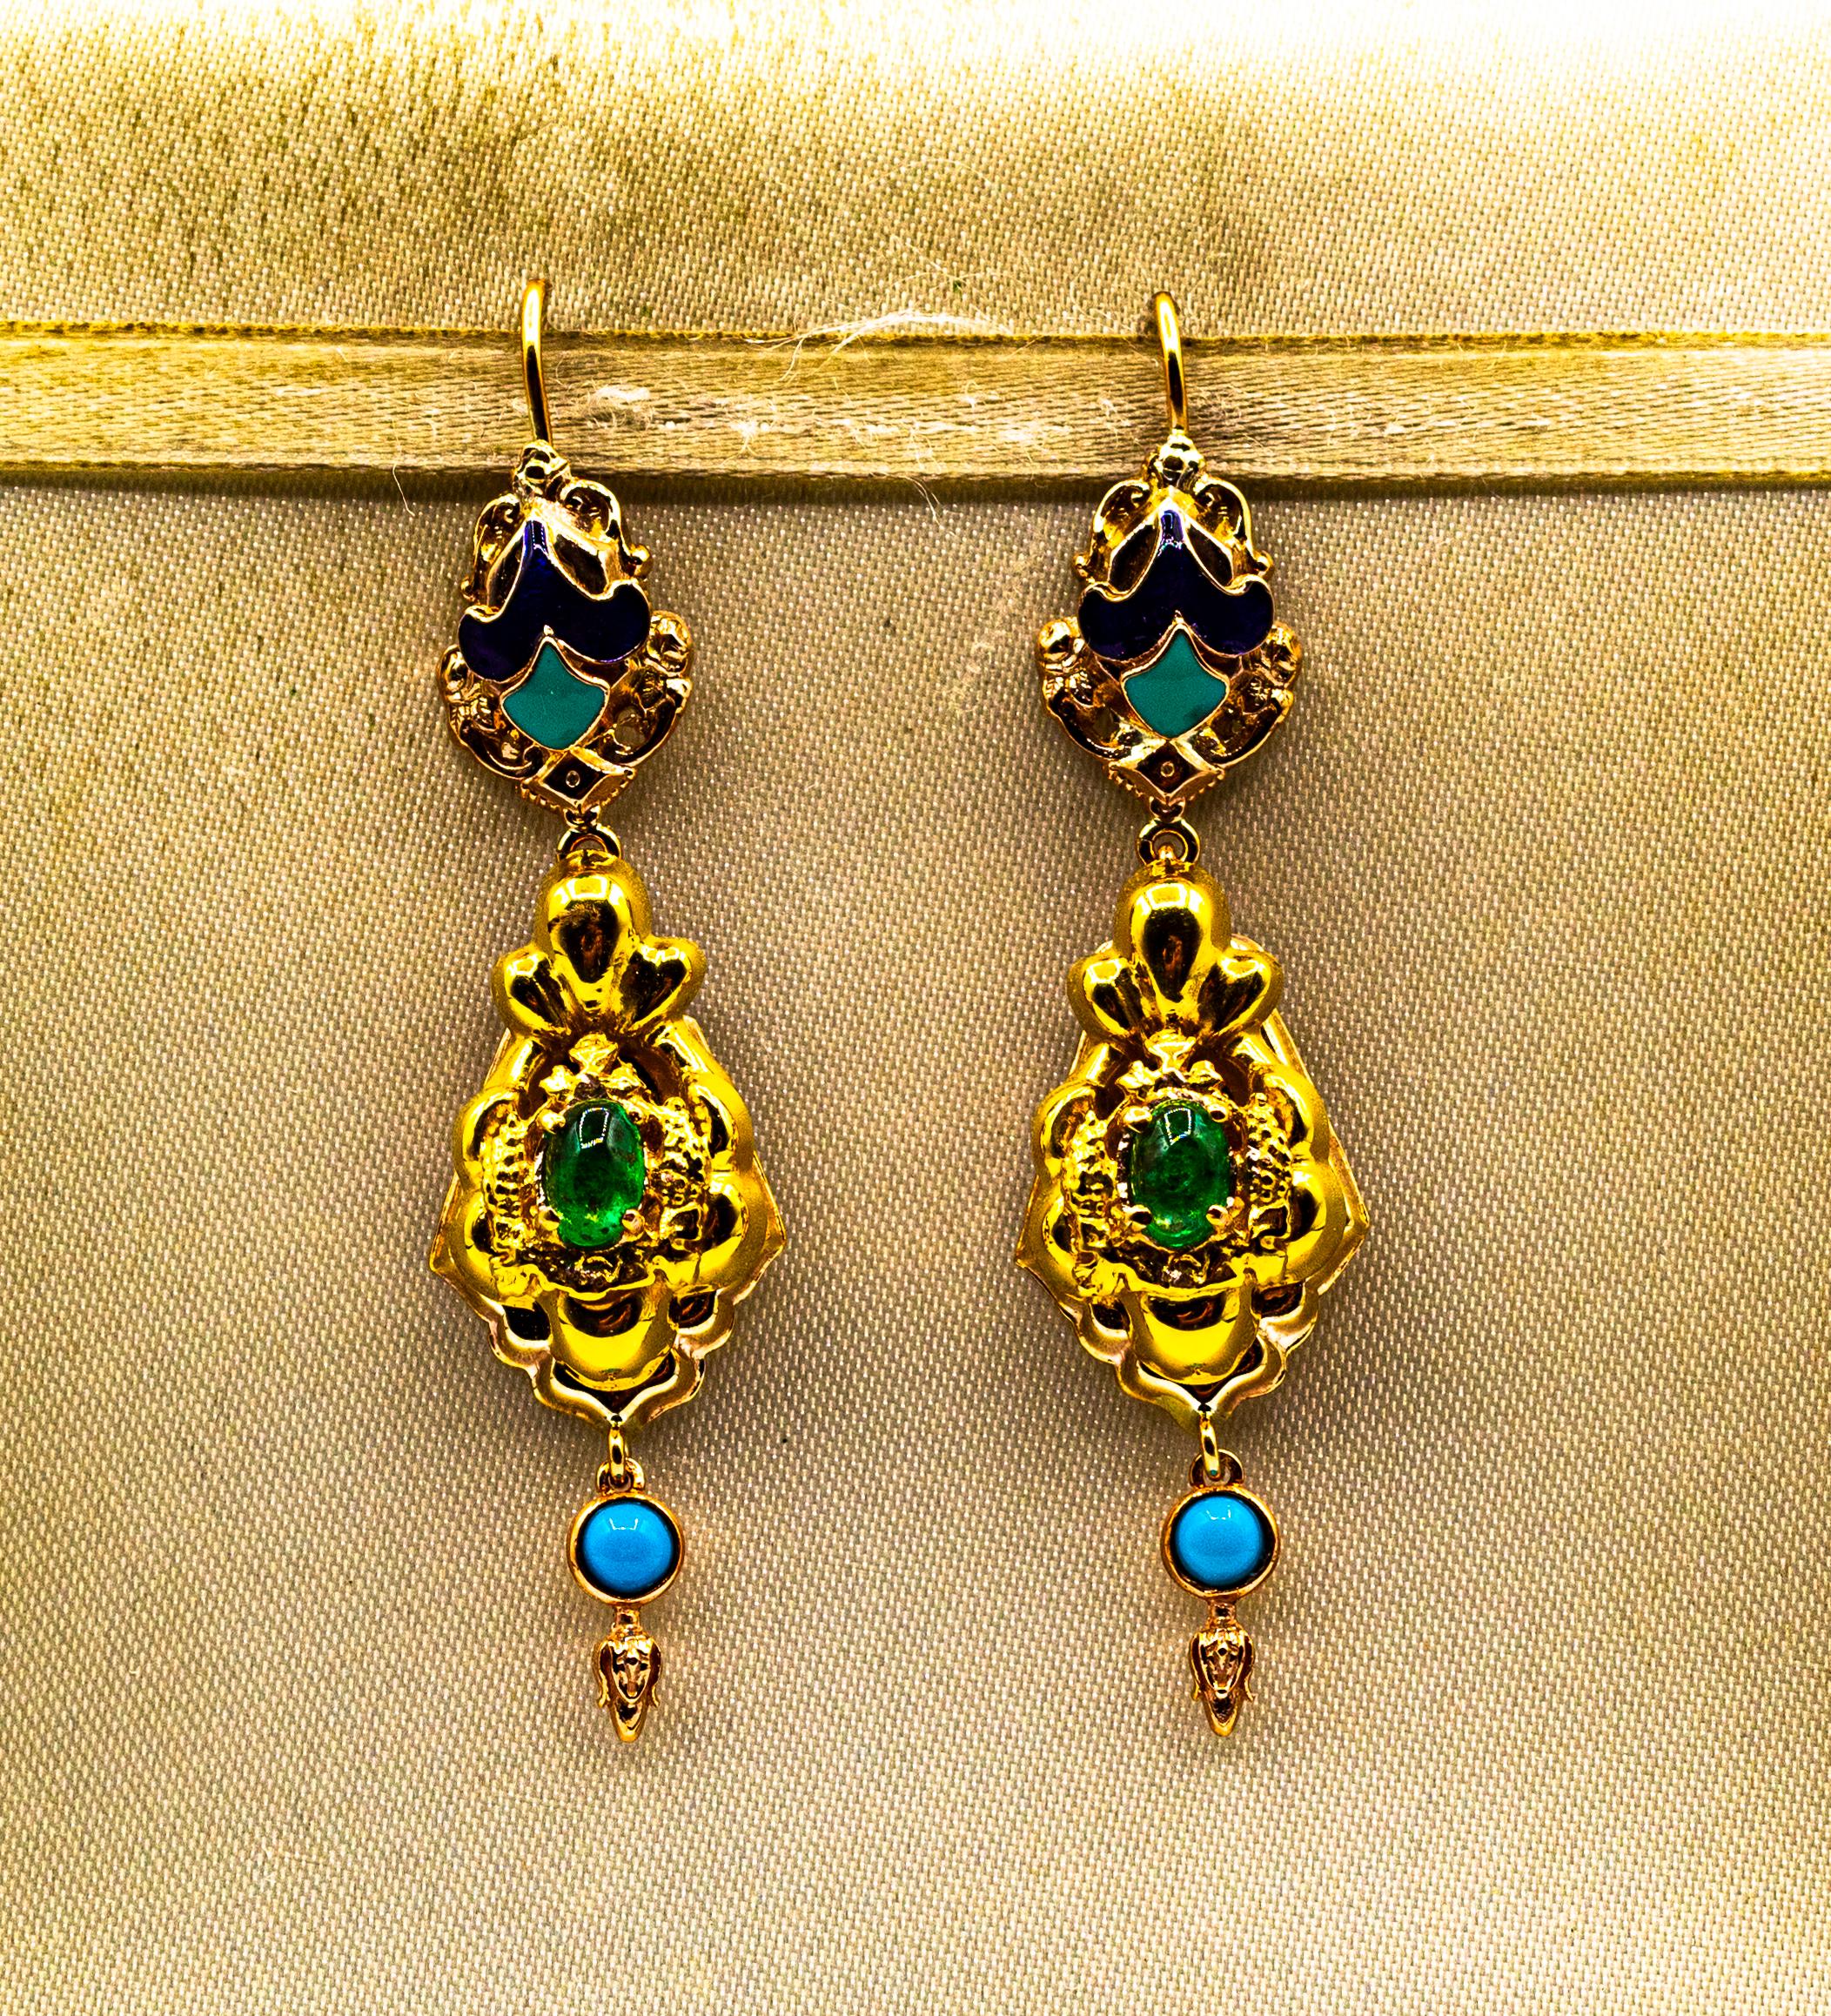 Cabochon Art Deco Style 0.60 Carat Emerald Turquoise Enamel Yellow Gold Drop Earrings For Sale